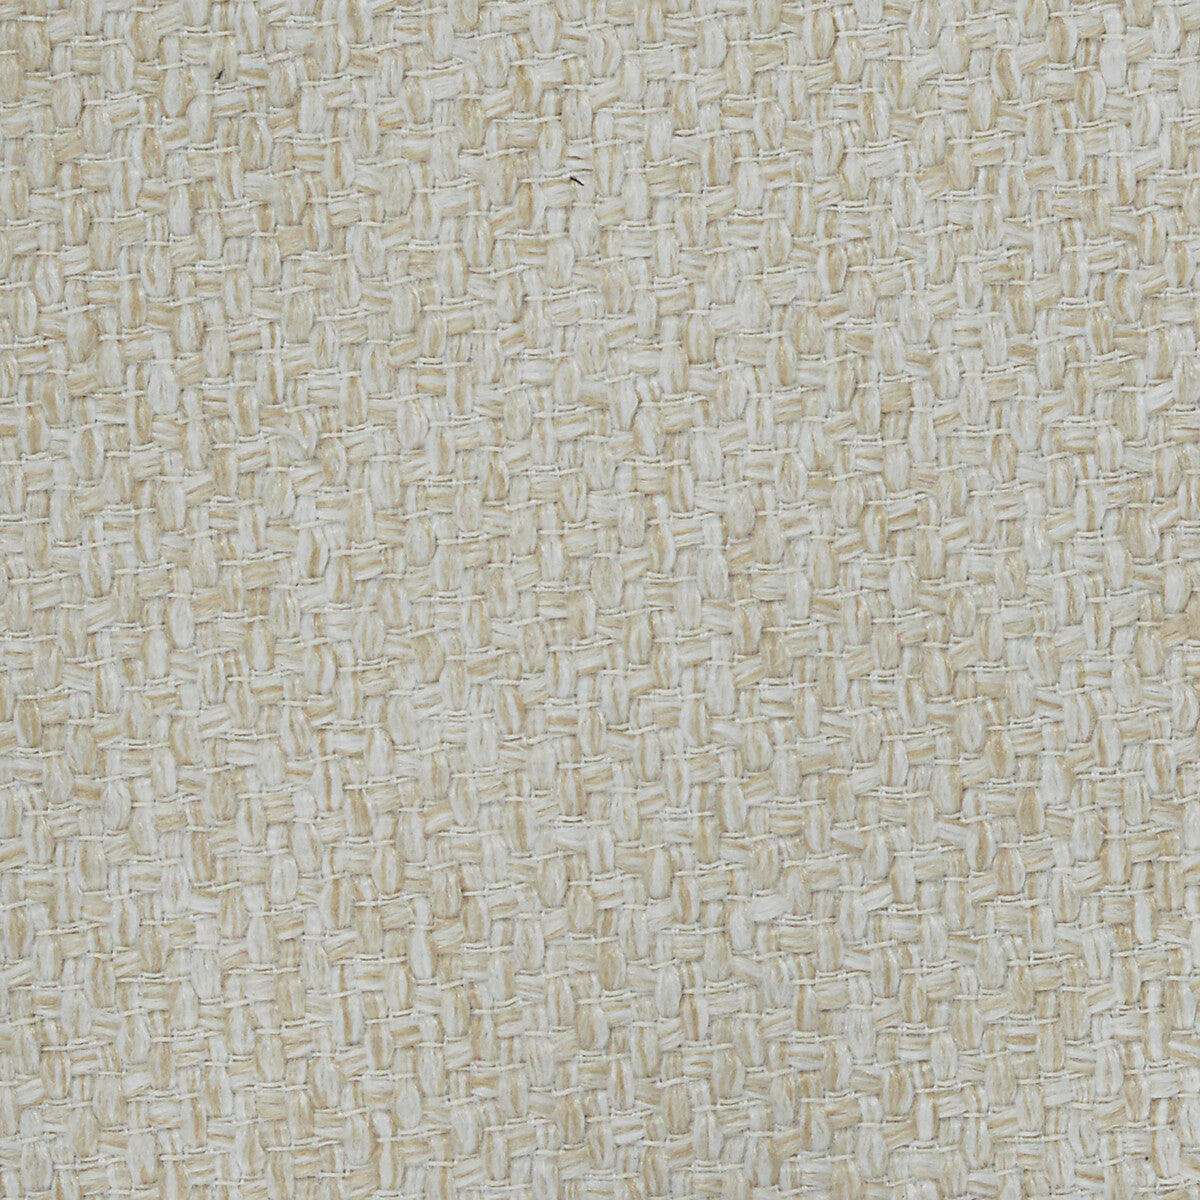 Kravet Contract fabric in 35180-116 color - pattern 35180.116.0 - by Kravet Contract